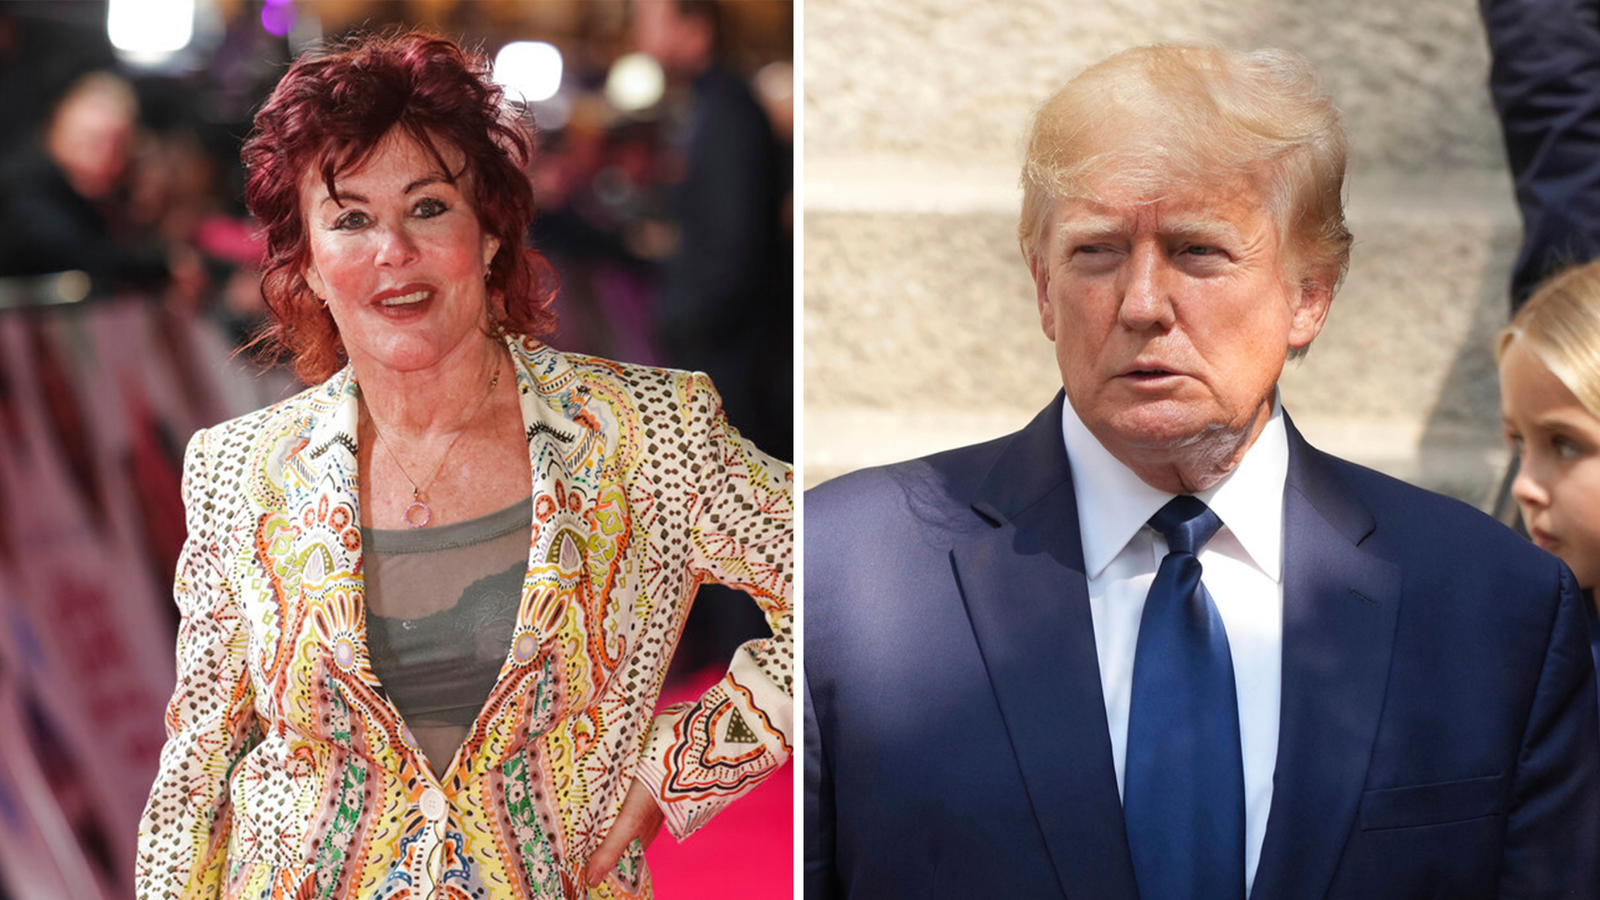 Donald Trump 'only likes women he can control', TV star Ruby Wax says, after former president found liable for sexually abusing writer